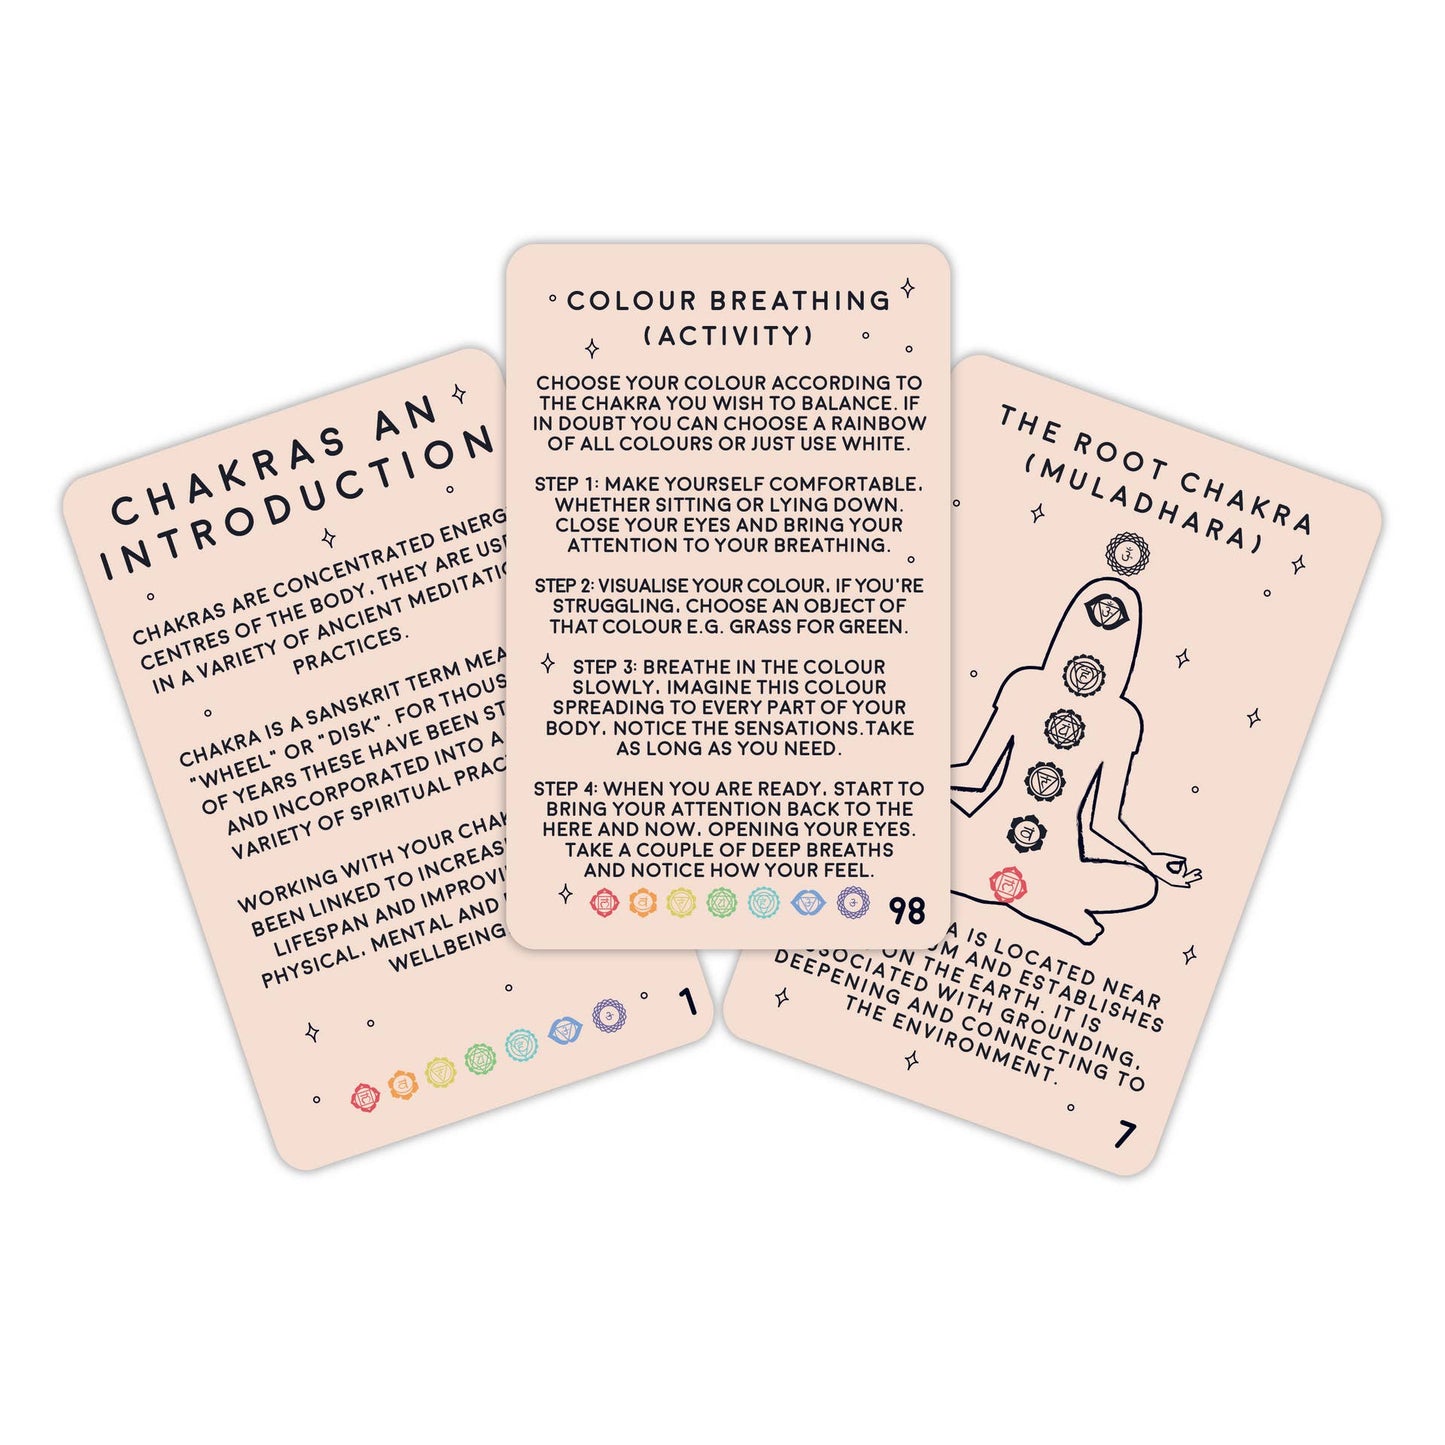 Chakra Cards - Channel More Confidence, Creativity, and Joy in Your Life